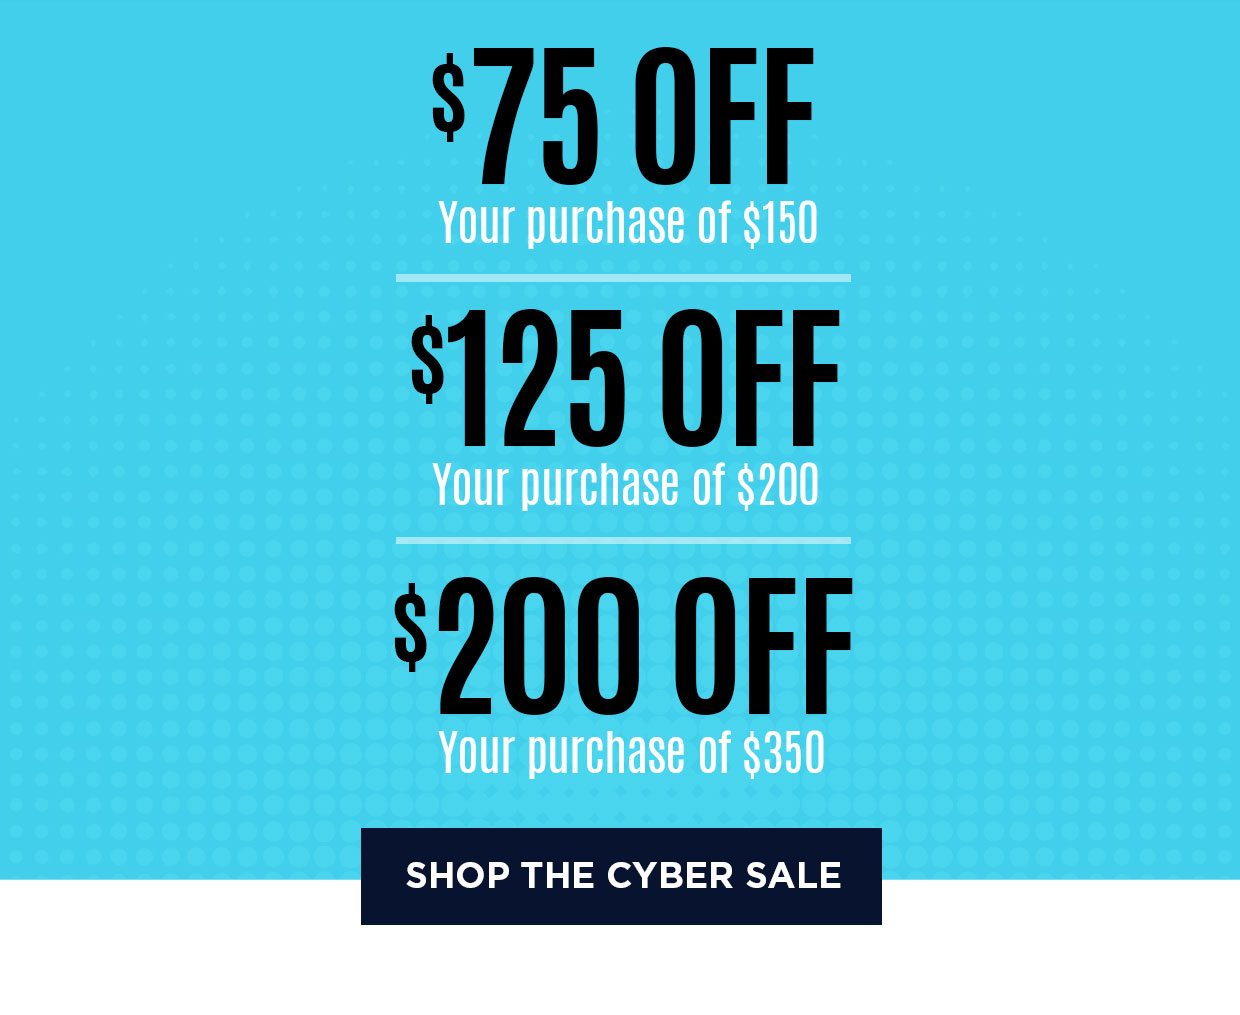 $75 off your purchase of $150. $125 off your purchase of $200. $200 off your purchase of $350. Shop the Cyber Sale.